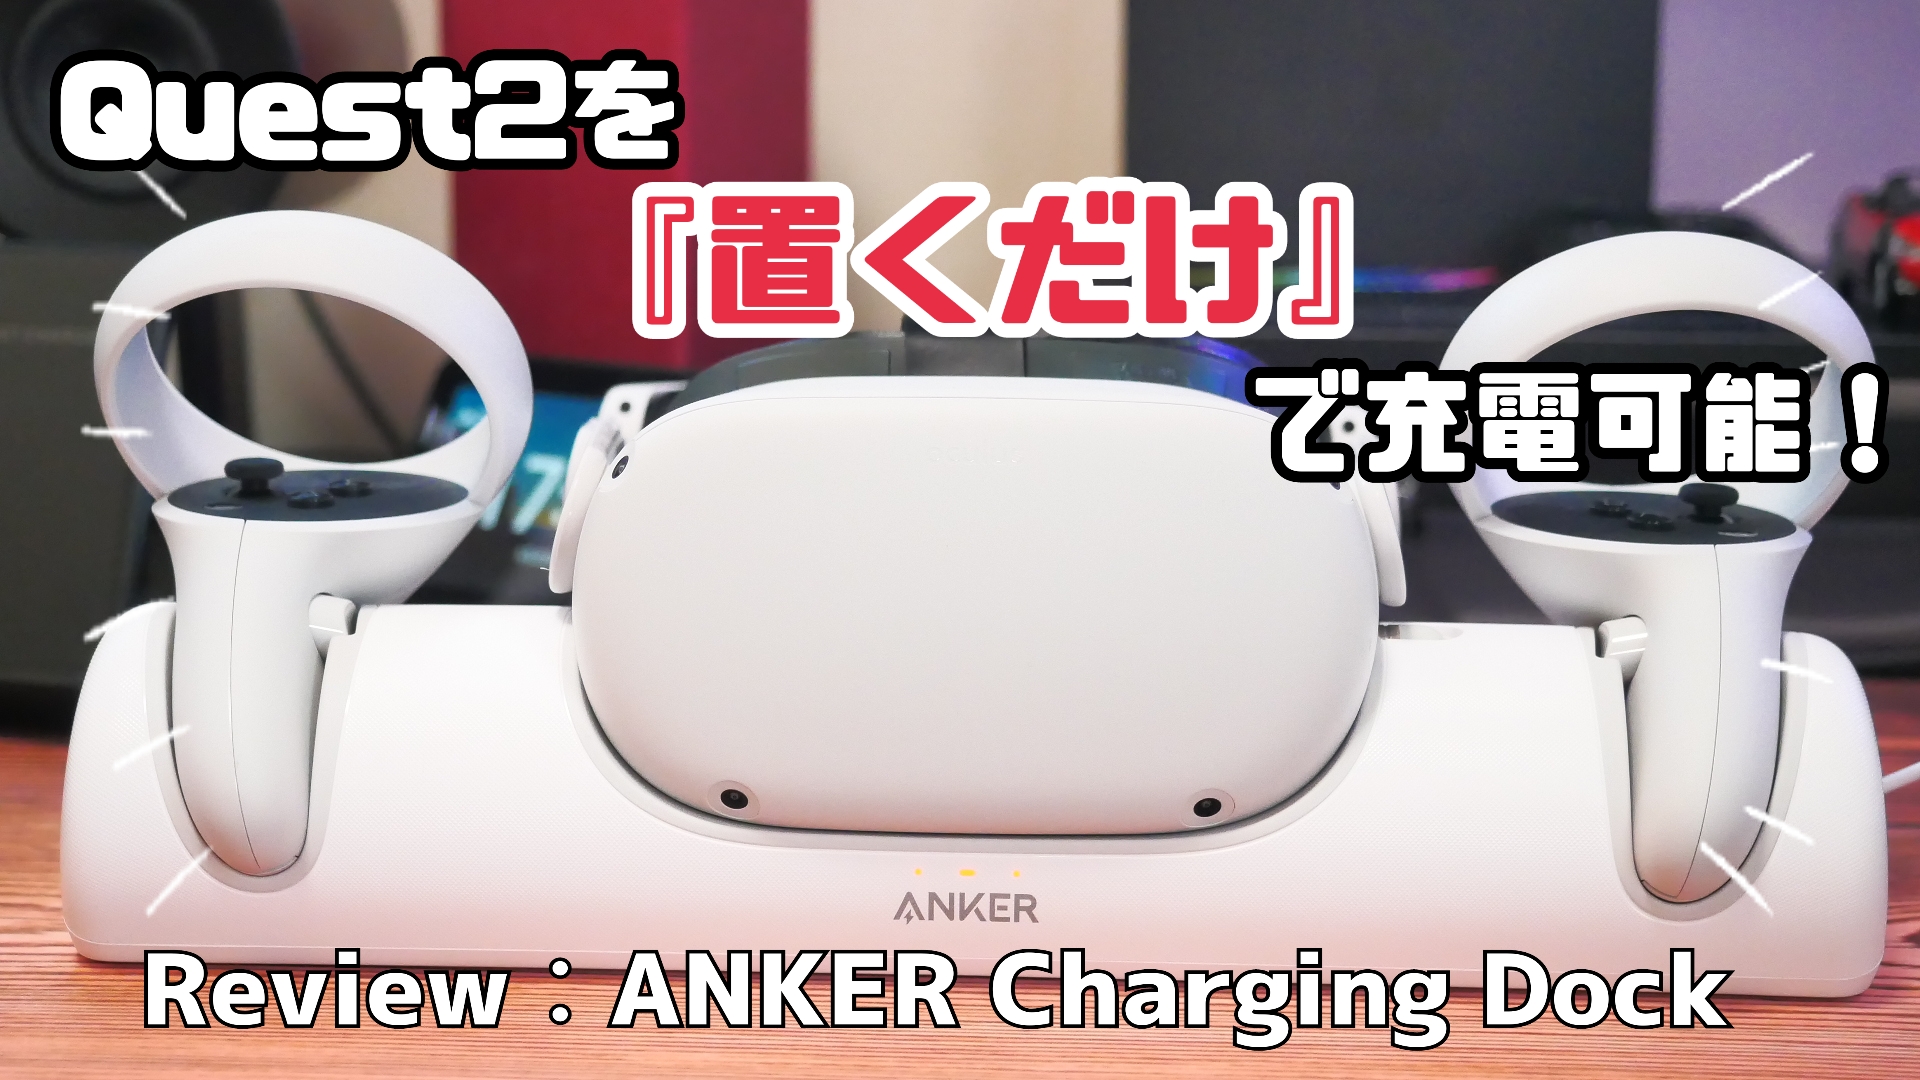 Quest2を『置くだけ』で充電可能！「Anker Charging Dock for Oculus 